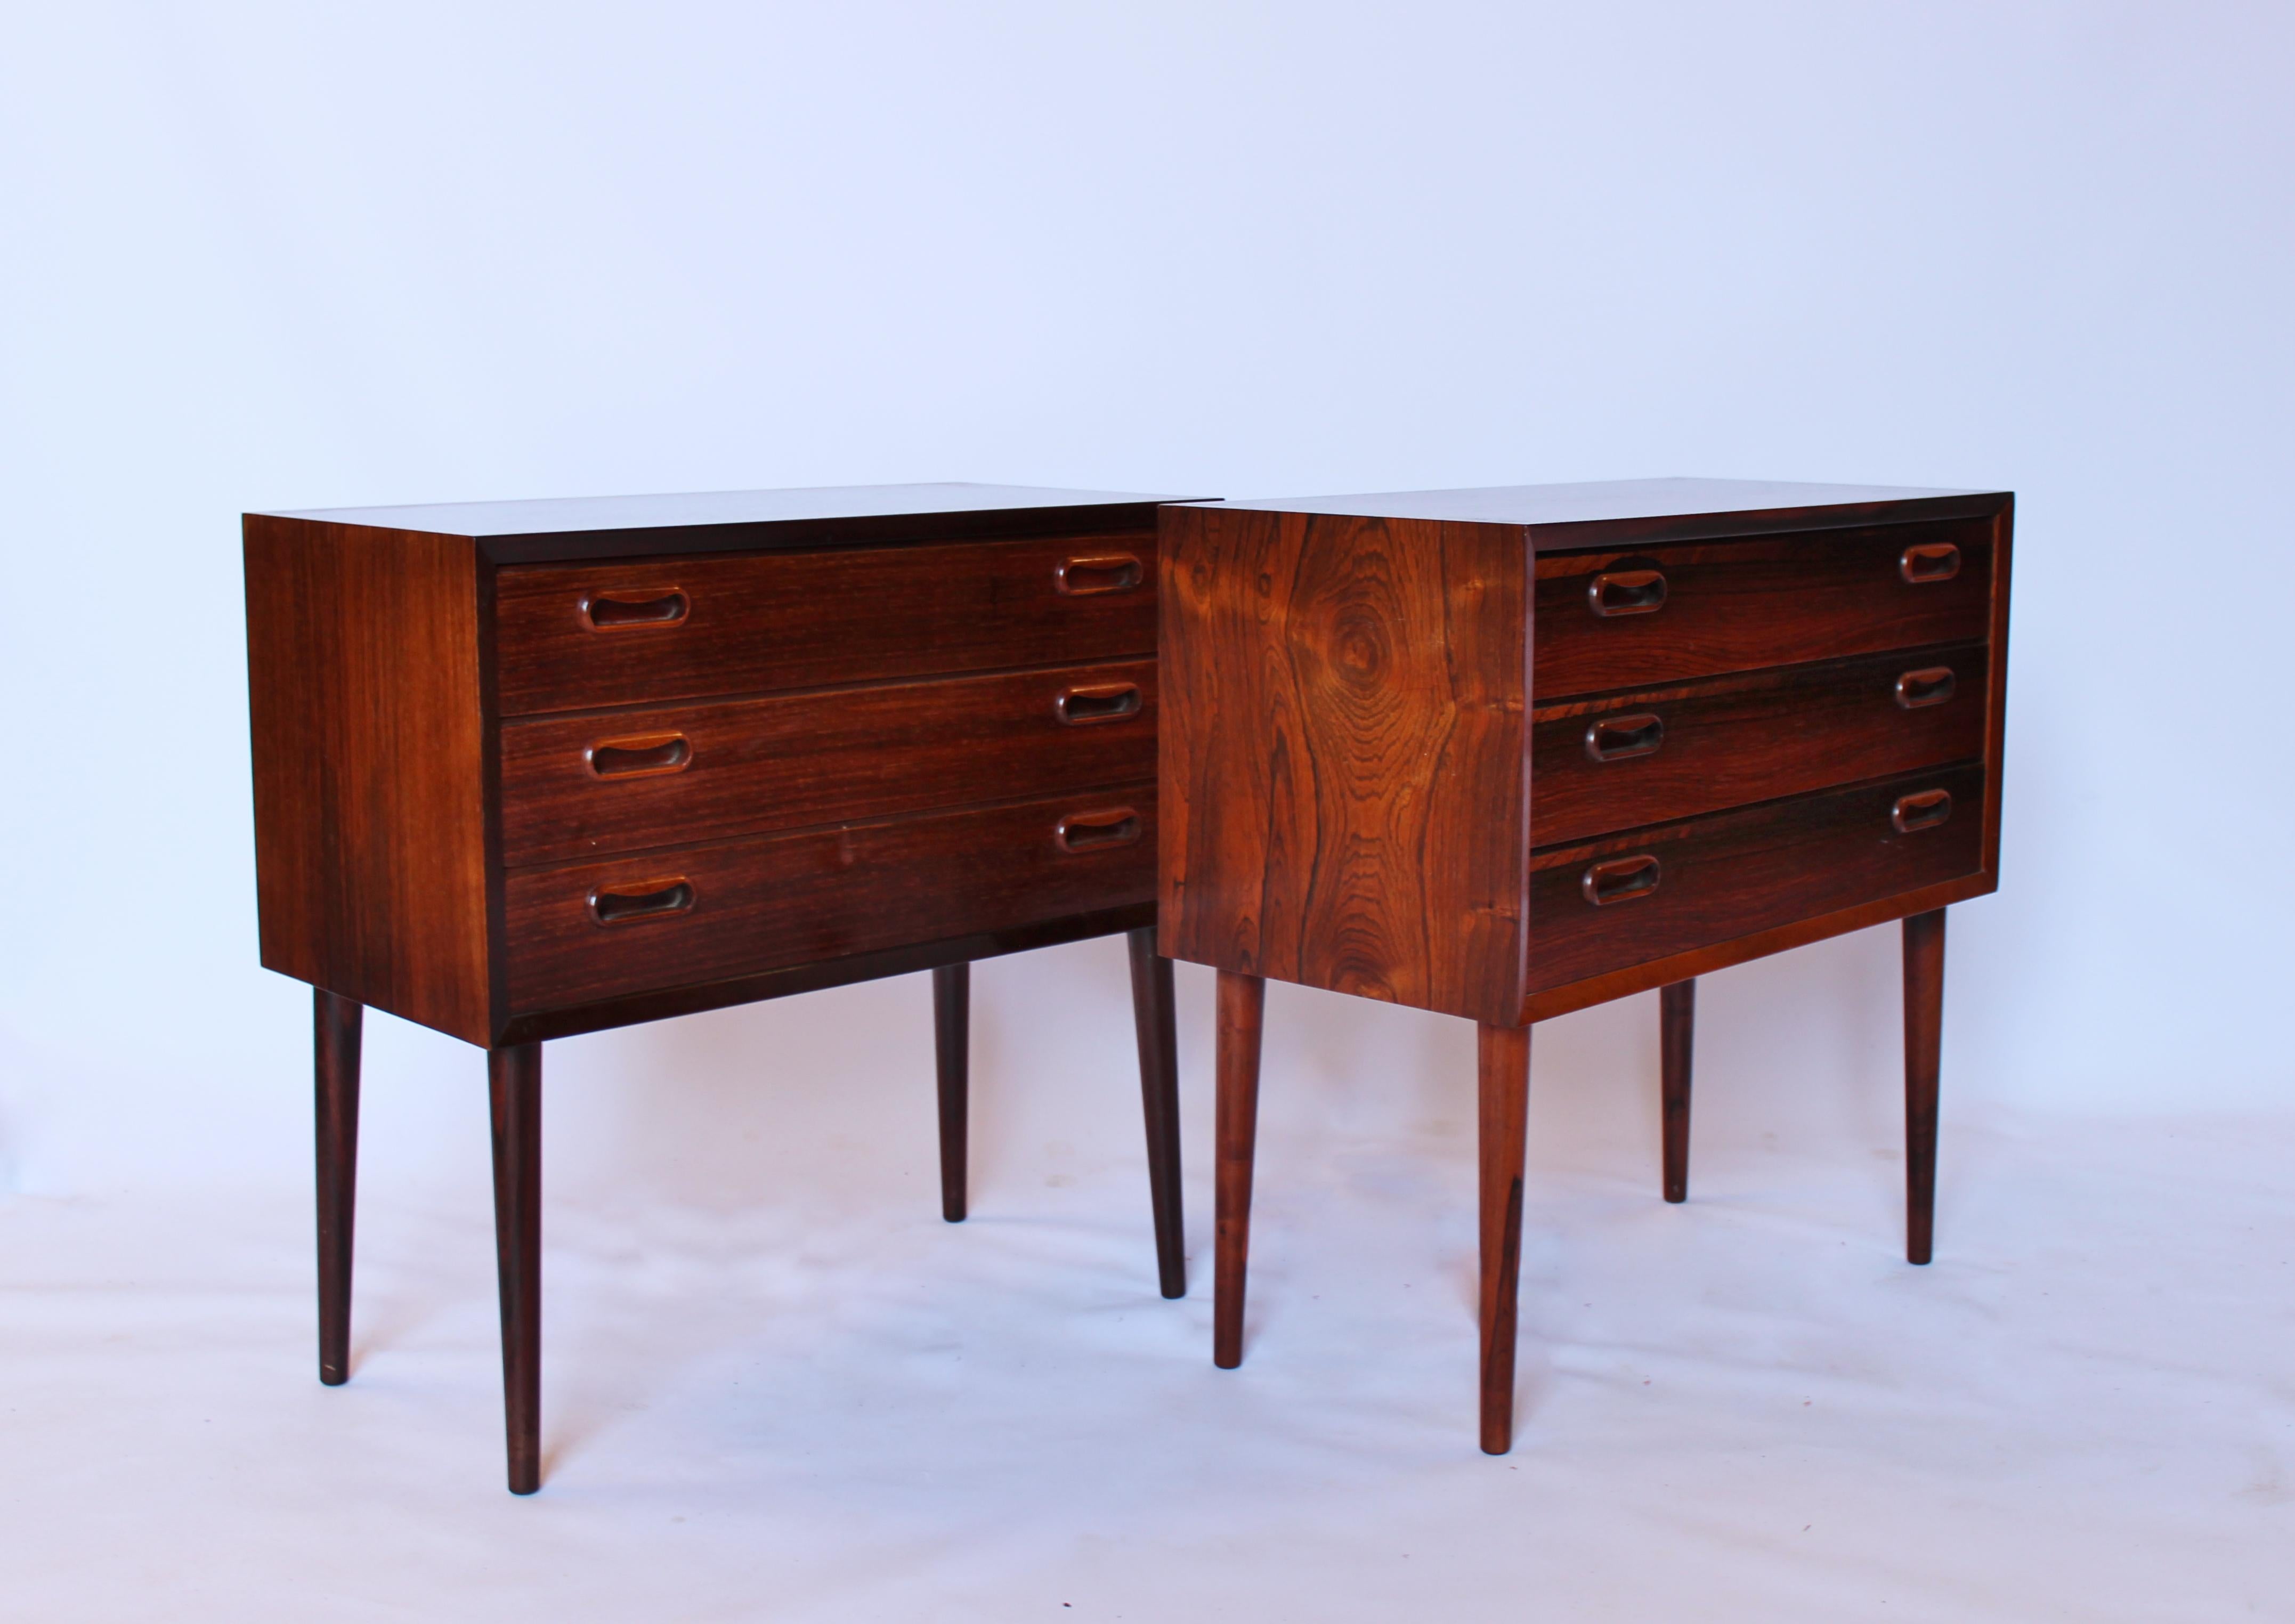 A set of bedside tables or chests in rosewood of Danish design from the 1960s. The chests are in great vintage condition.